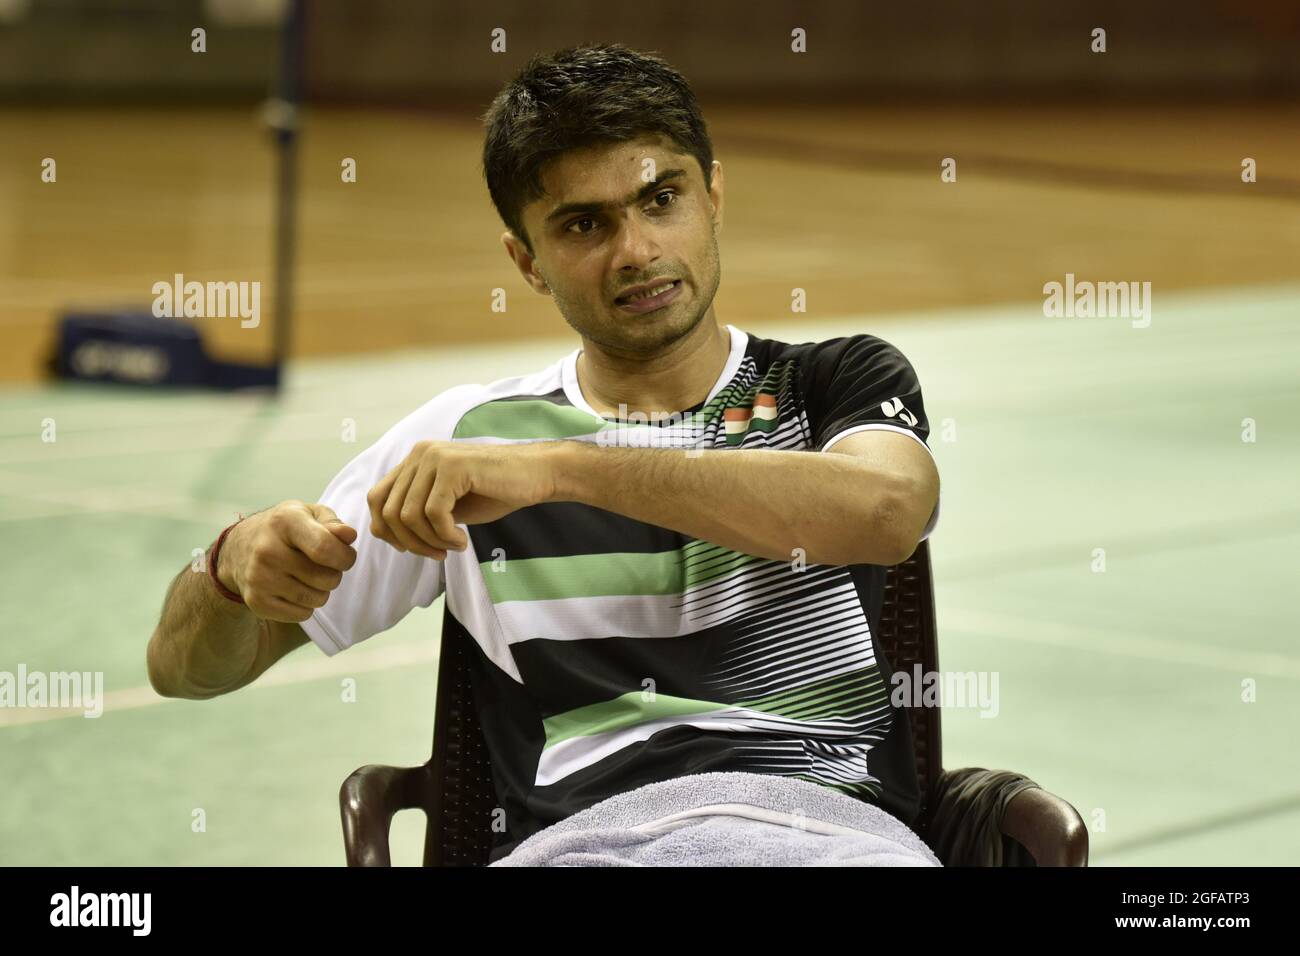 Page 3 - Badminton Player Asian High Resolution Stock Photography and  Images - Alamy